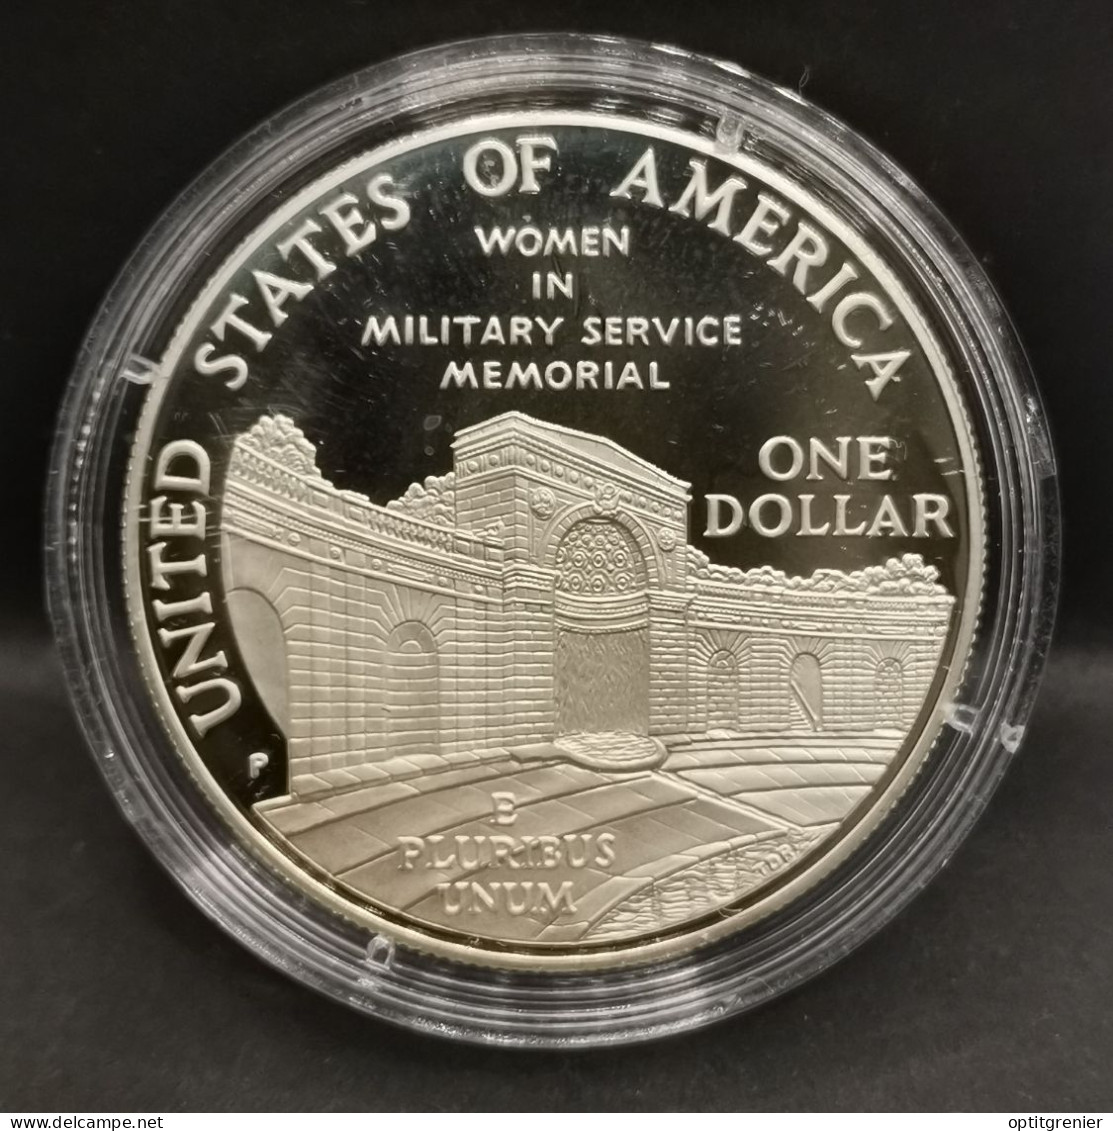 1 DOLLAR BE ARGENT 1994 P Women In Military Service For America Memorial USA / PROOF SILVER - Unclassified